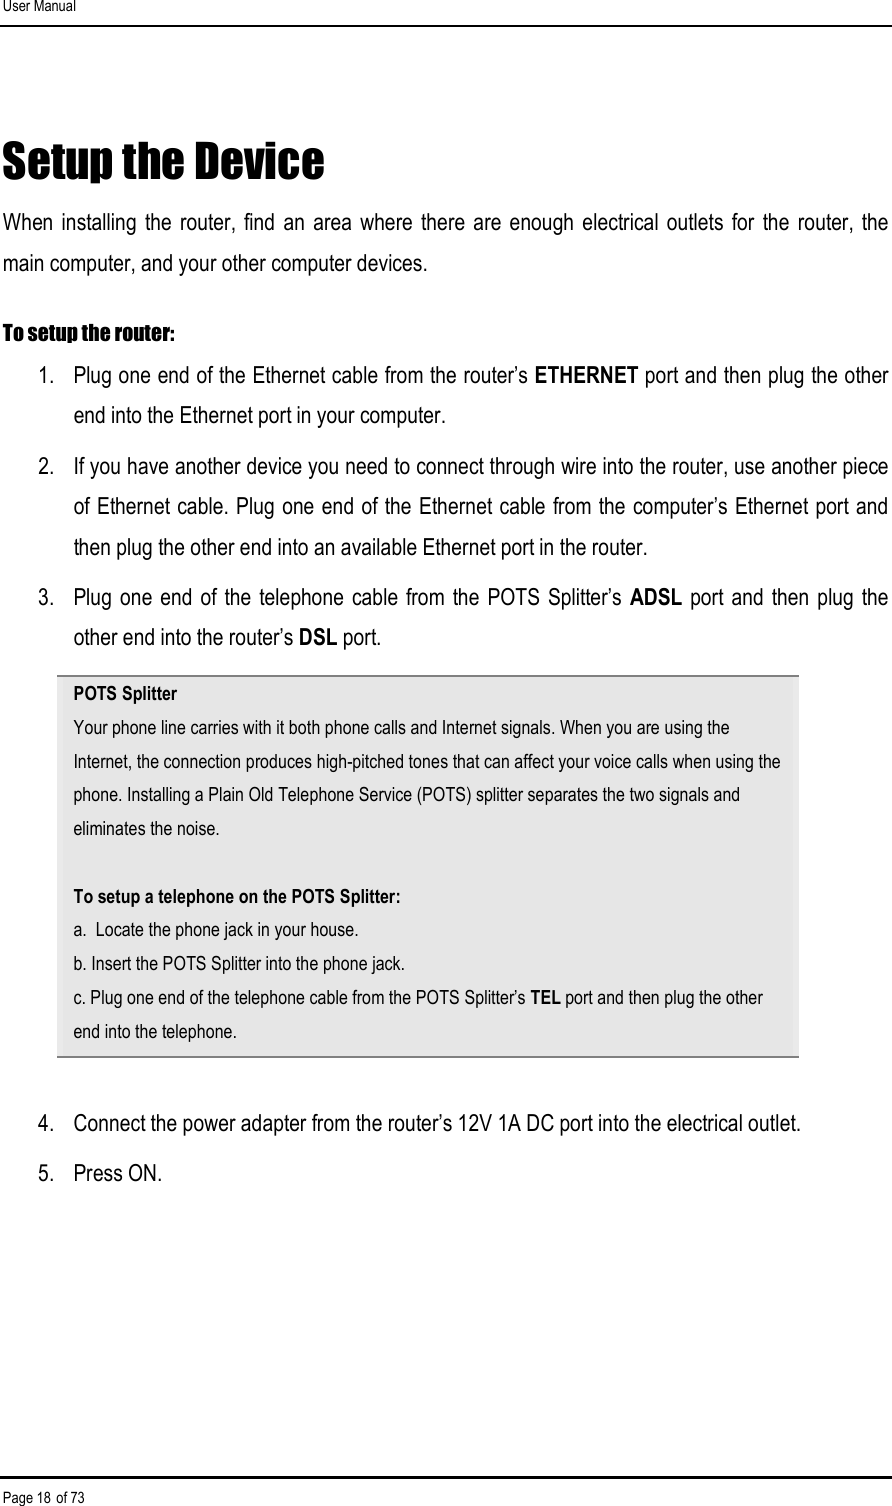 User Manual Page 18 of 73 Setup the Device When  installing  the  router, find  an area  where there are  enough  electrical  outlets for  the  router,  the main computer, and your other computer devices.  To setup the router: 1.  Plug one end of the Ethernet cable from the router’s ETHERNET port and then plug the other end into the Ethernet port in your computer. 2.  If you have another device you need to connect through wire into the router, use another piece of Ethernet cable. Plug one end of the Ethernet cable from the computer’s Ethernet port and then plug the other end into an available Ethernet port in the router.  3.  Plug one end  of the  telephone  cable from  the POTS  Splitter’s  ADSL port  and then plug the other end into the router’s DSL port. POTS Splitter Your phone line carries with it both phone calls and Internet signals. When you are using the Internet, the connection produces high-pitched tones that can affect your voice calls when using the phone. Installing a Plain Old Telephone Service (POTS) splitter separates the two signals and eliminates the noise.  To setup a telephone on the POTS Splitter: a.  Locate the phone jack in your house. b. Insert the POTS Splitter into the phone jack. c. Plug one end of the telephone cable from the POTS Splitter’s TEL port and then plug the other end into the telephone.  4.  Connect the power adapter from the router’s 12V 1A DC port into the electrical outlet. 5.  Press ON.  